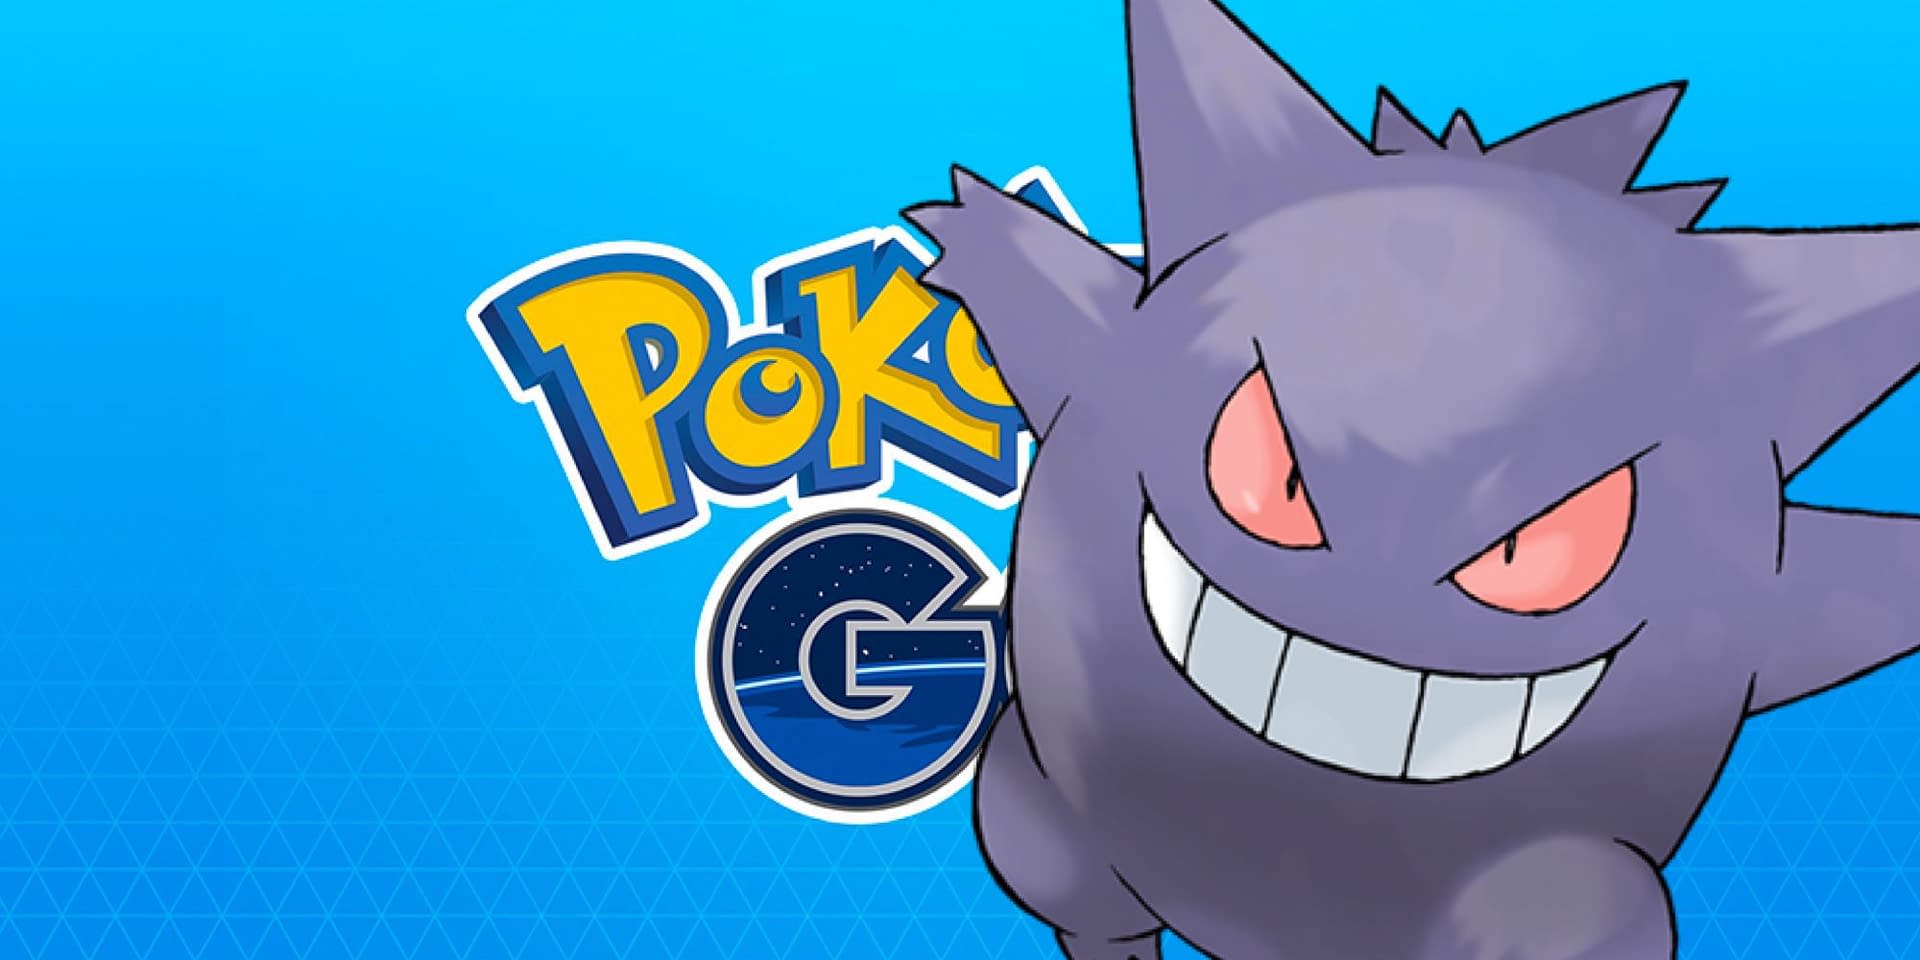 Party Hat Gengar Raid Guide For Pokémon GO: New Year's 2023